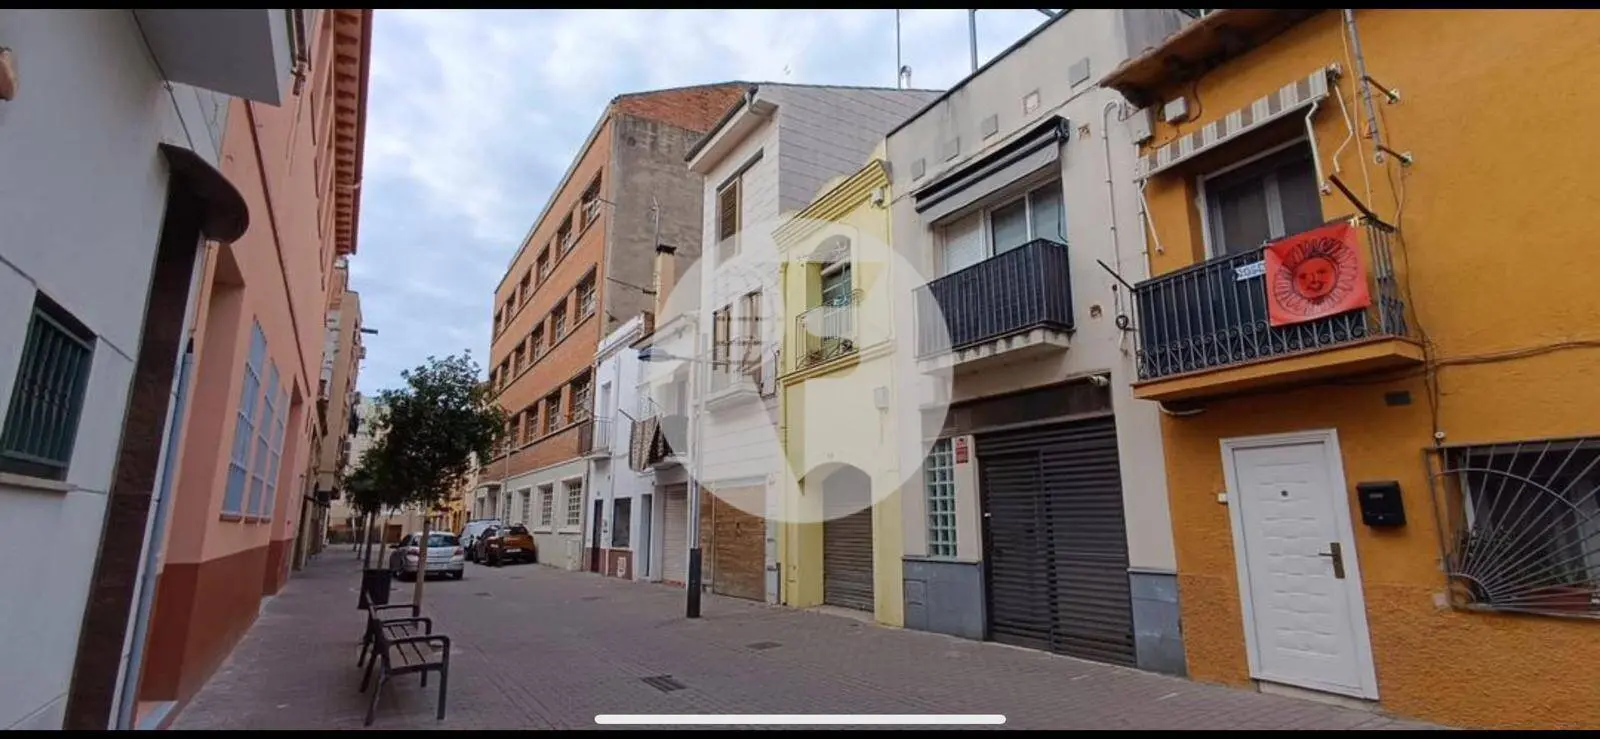  Charming 88 m² house in the center of Mollet del Vallès 23